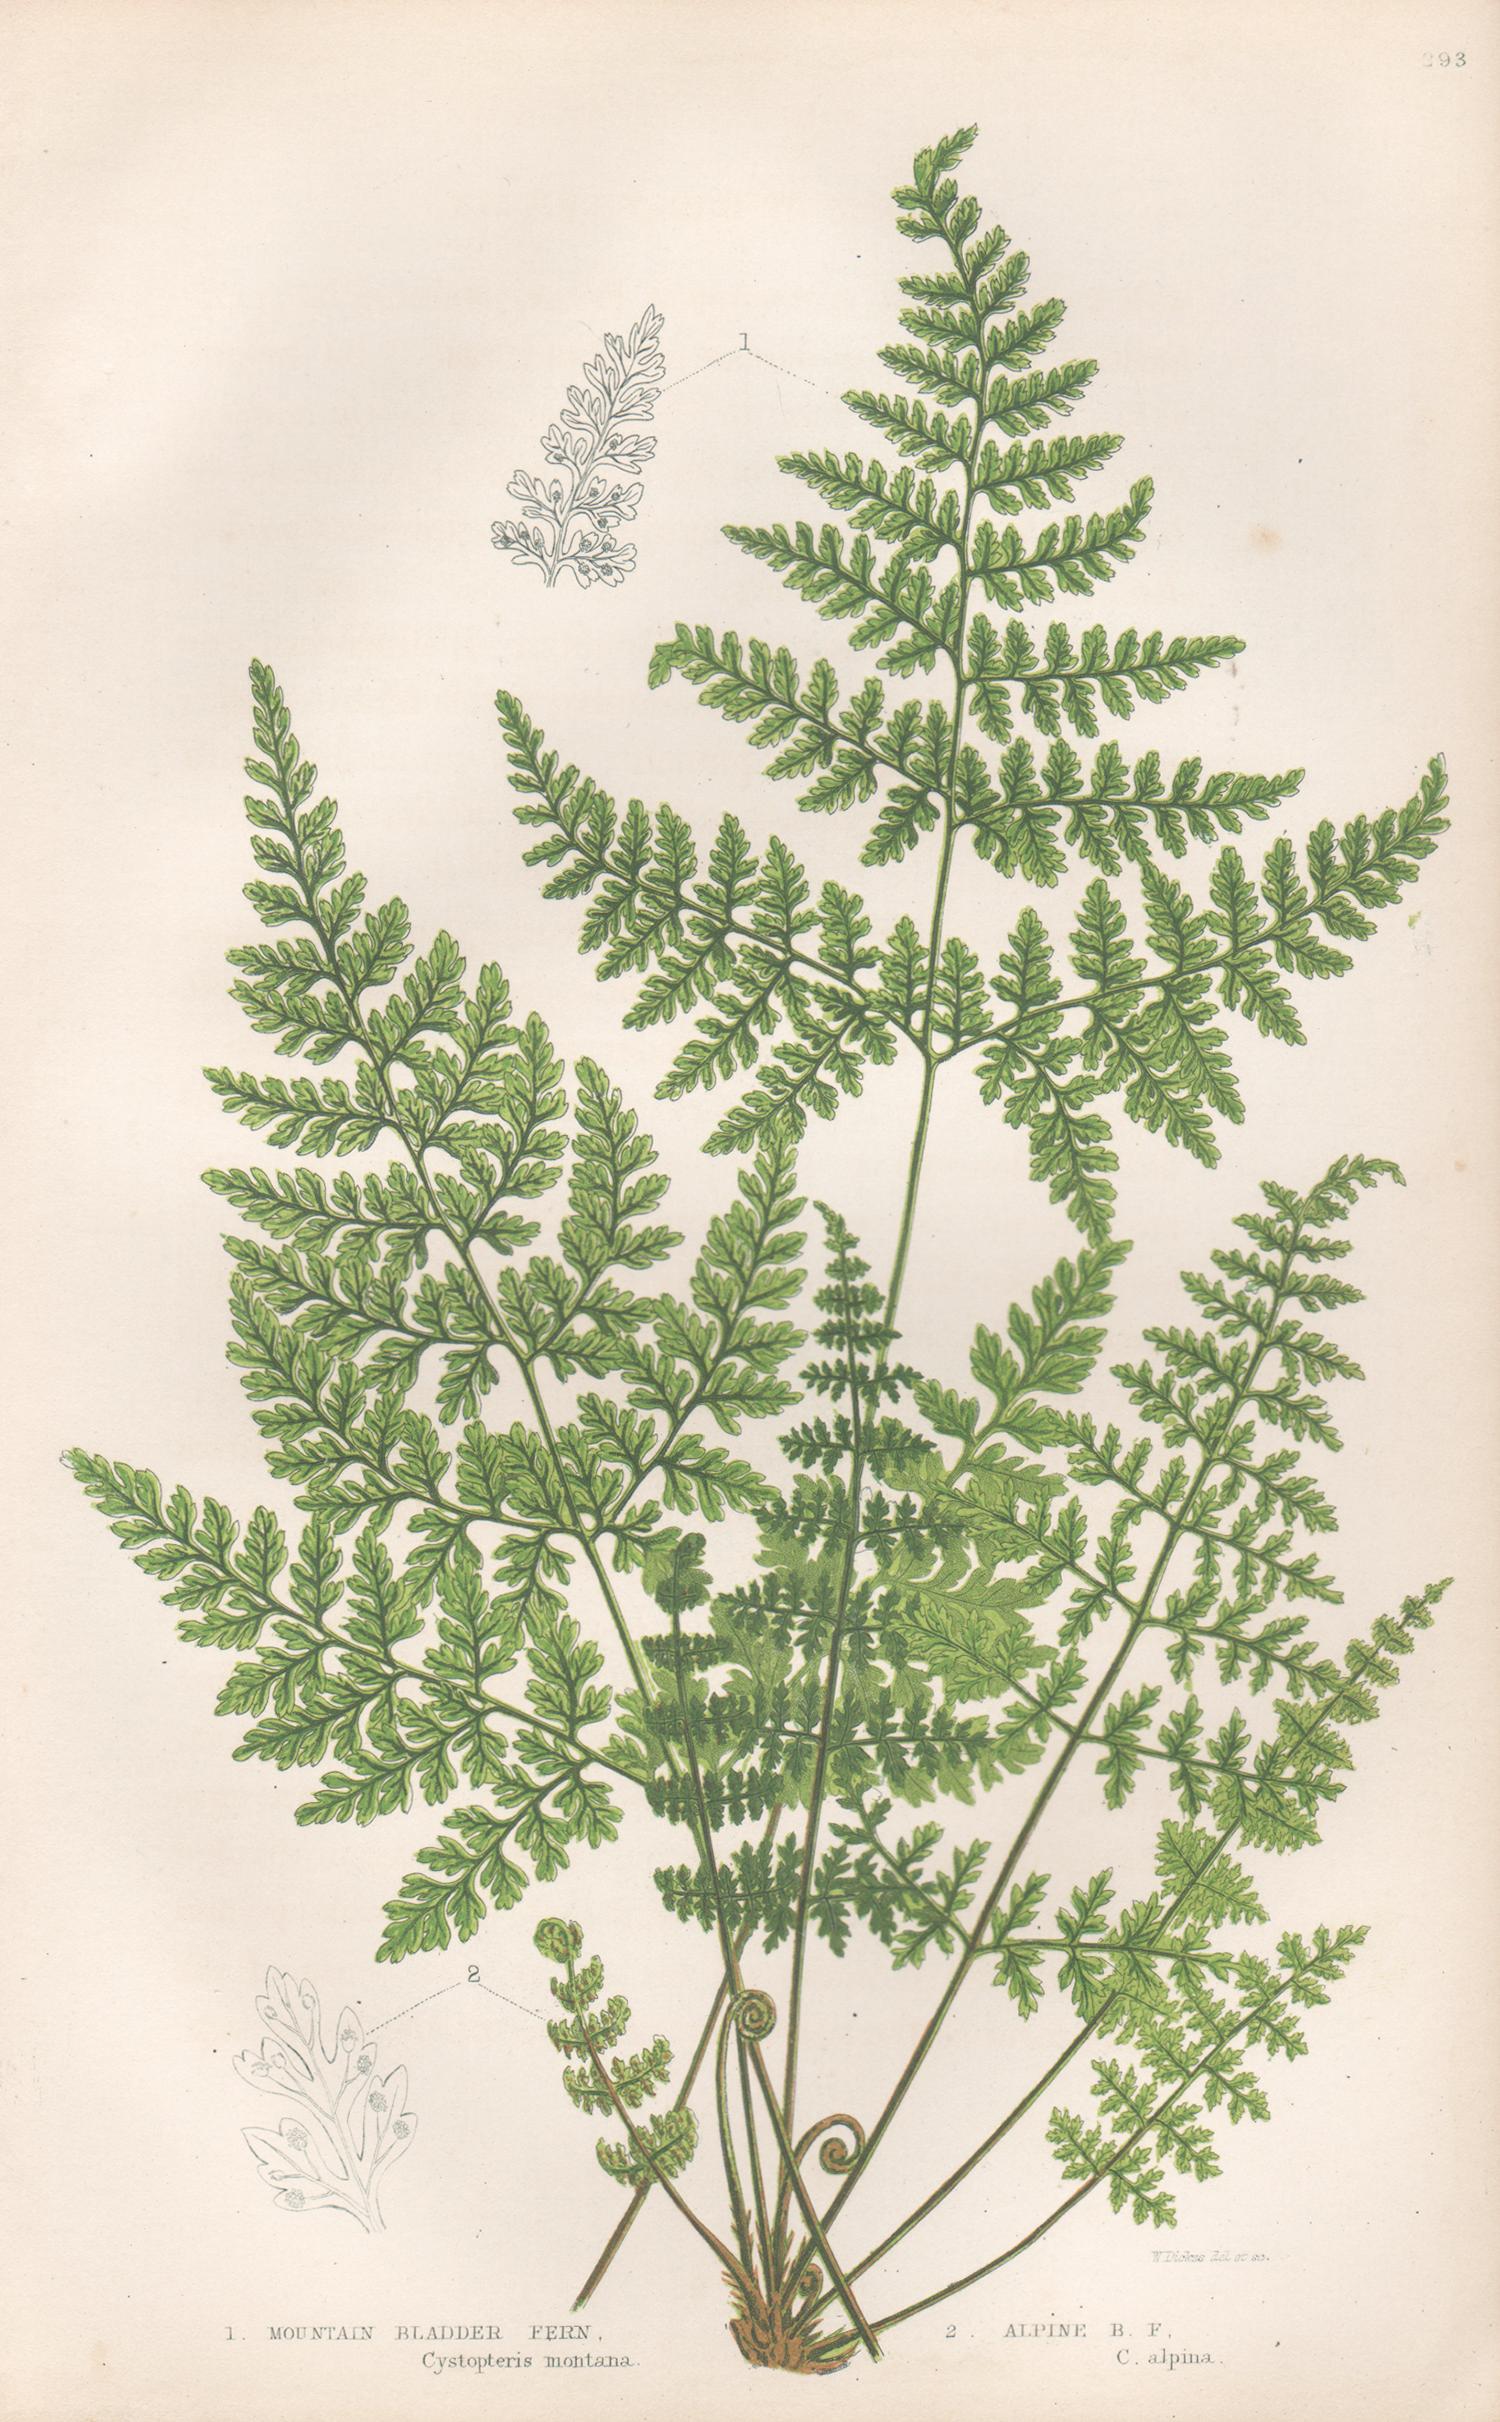 Ferns - Collection of 22 antique fern botanical woodblock prints 1